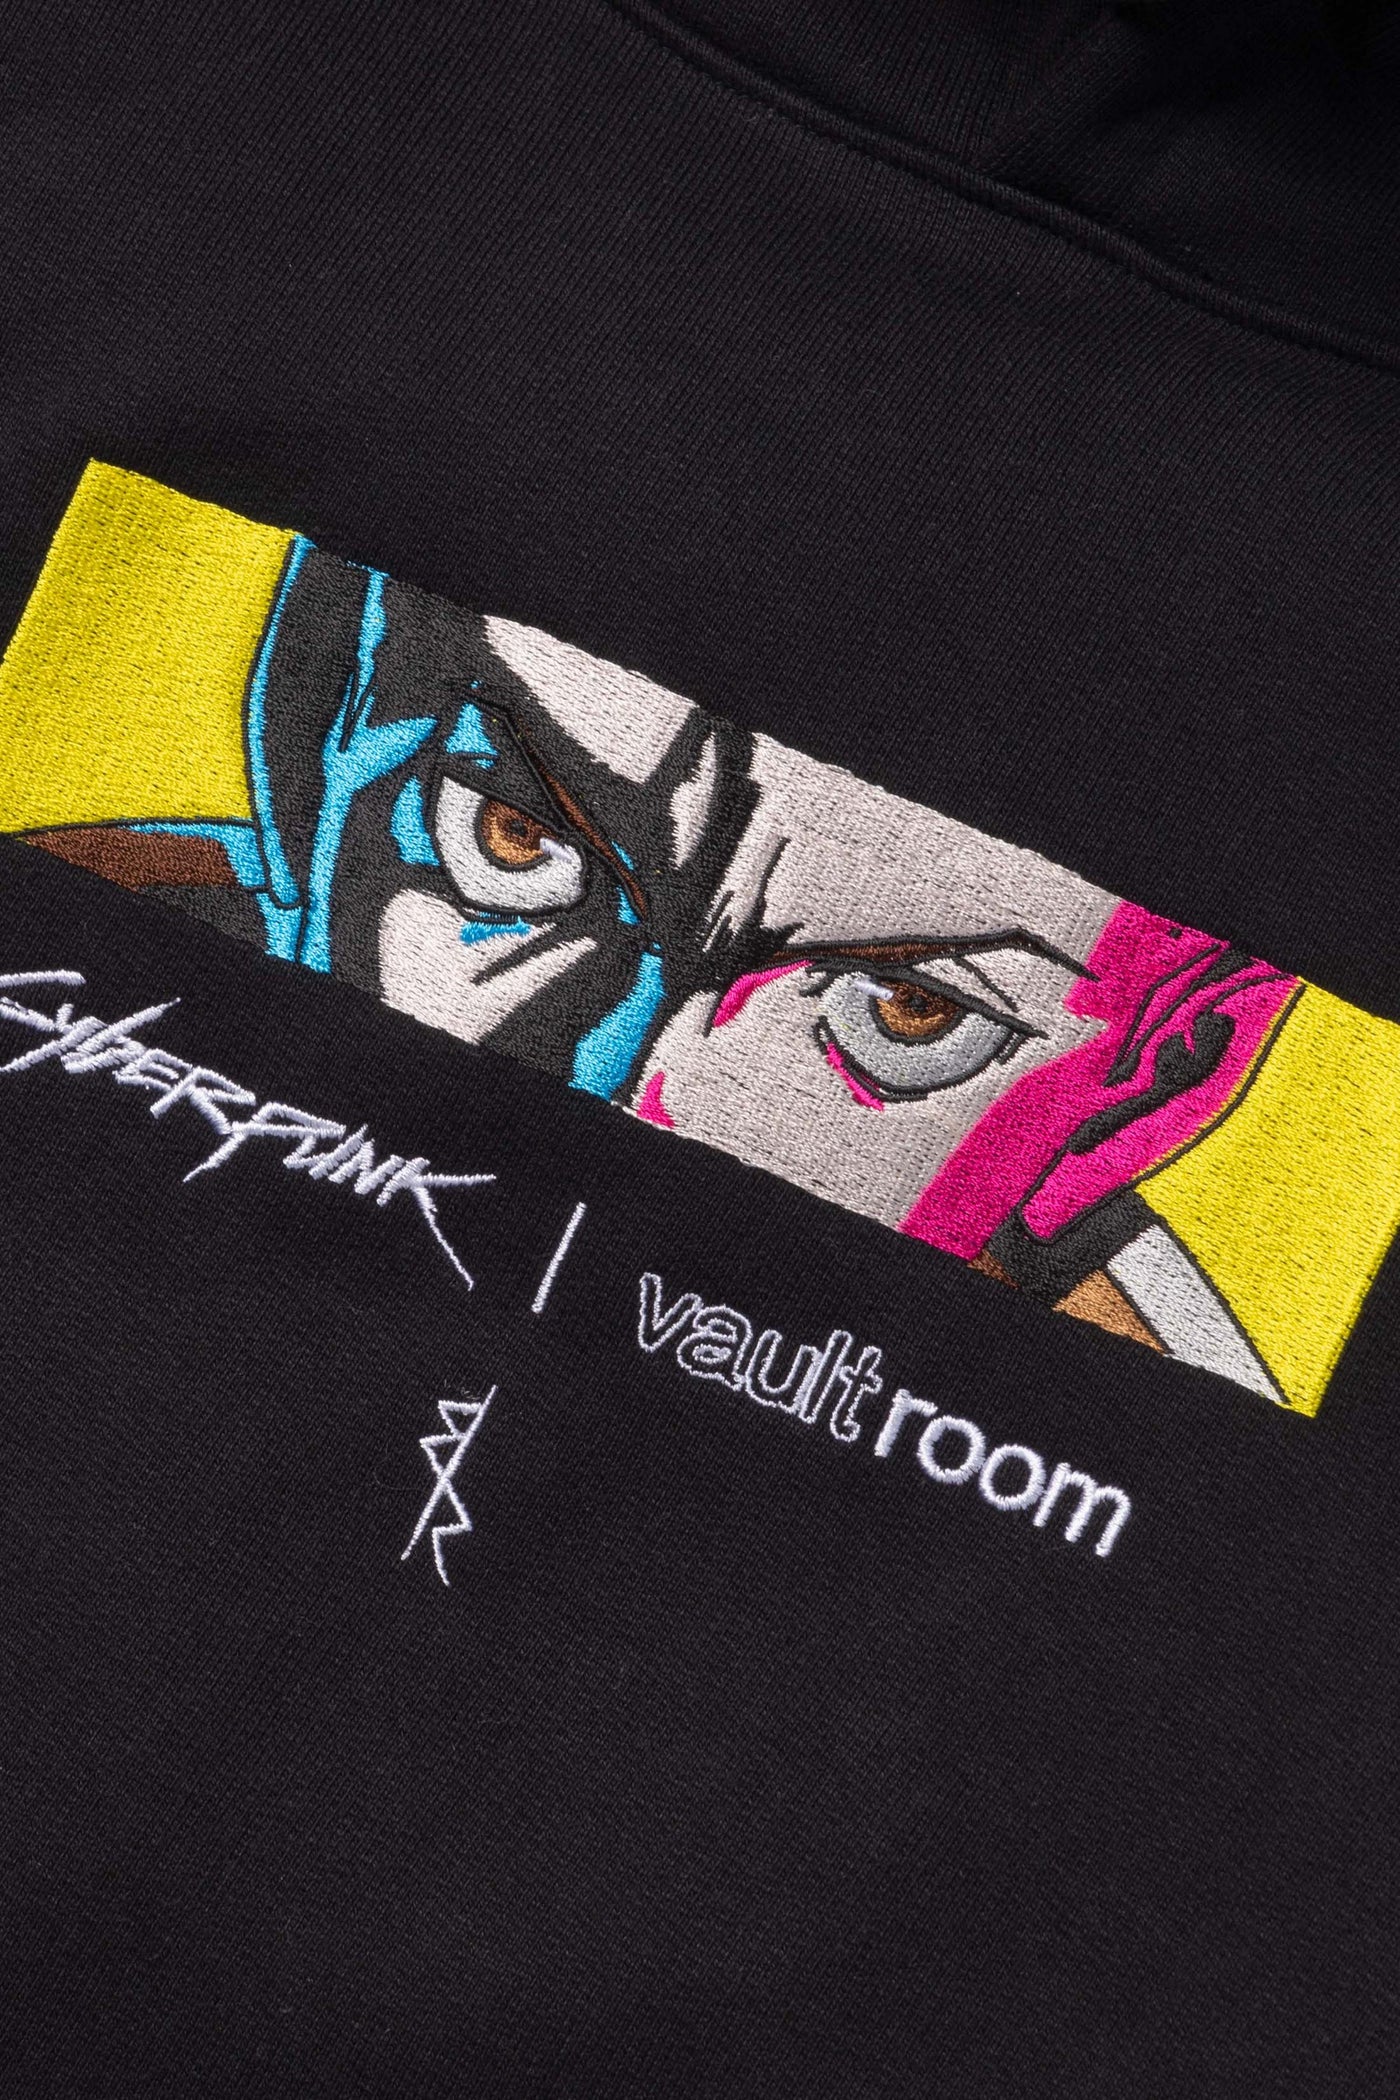 valut room × CYBERPUNK LUCY Tシャツ 白 L - Tシャツ/カットソー(半袖